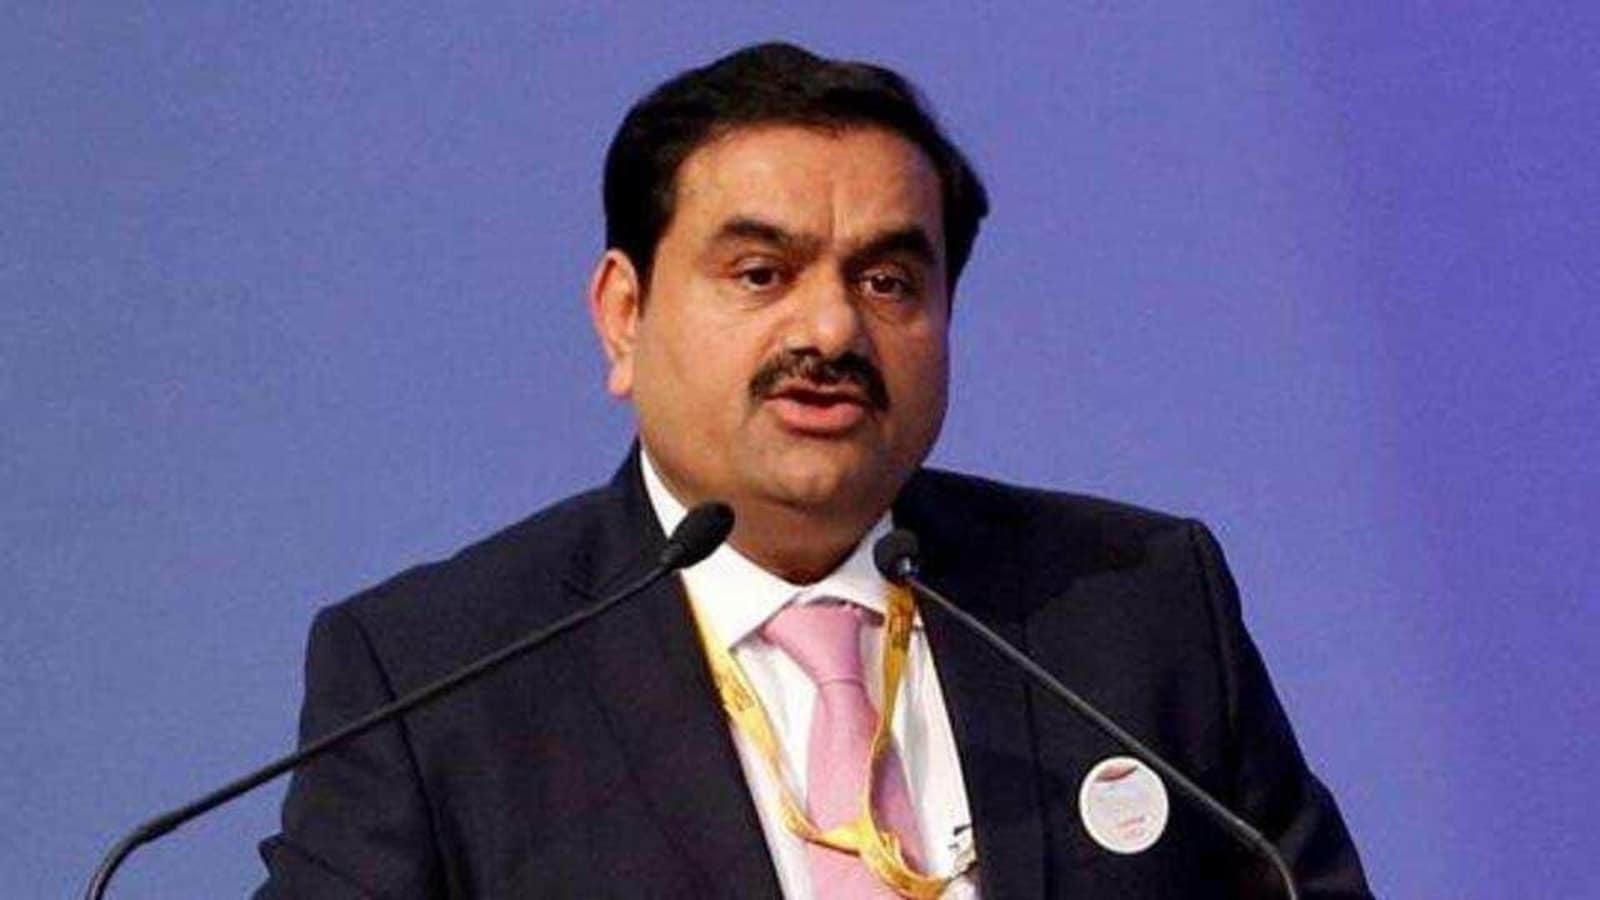 Adani's Acquisition Of NDTV Gets A Boost As Sebi Clears The Way For Open Offer